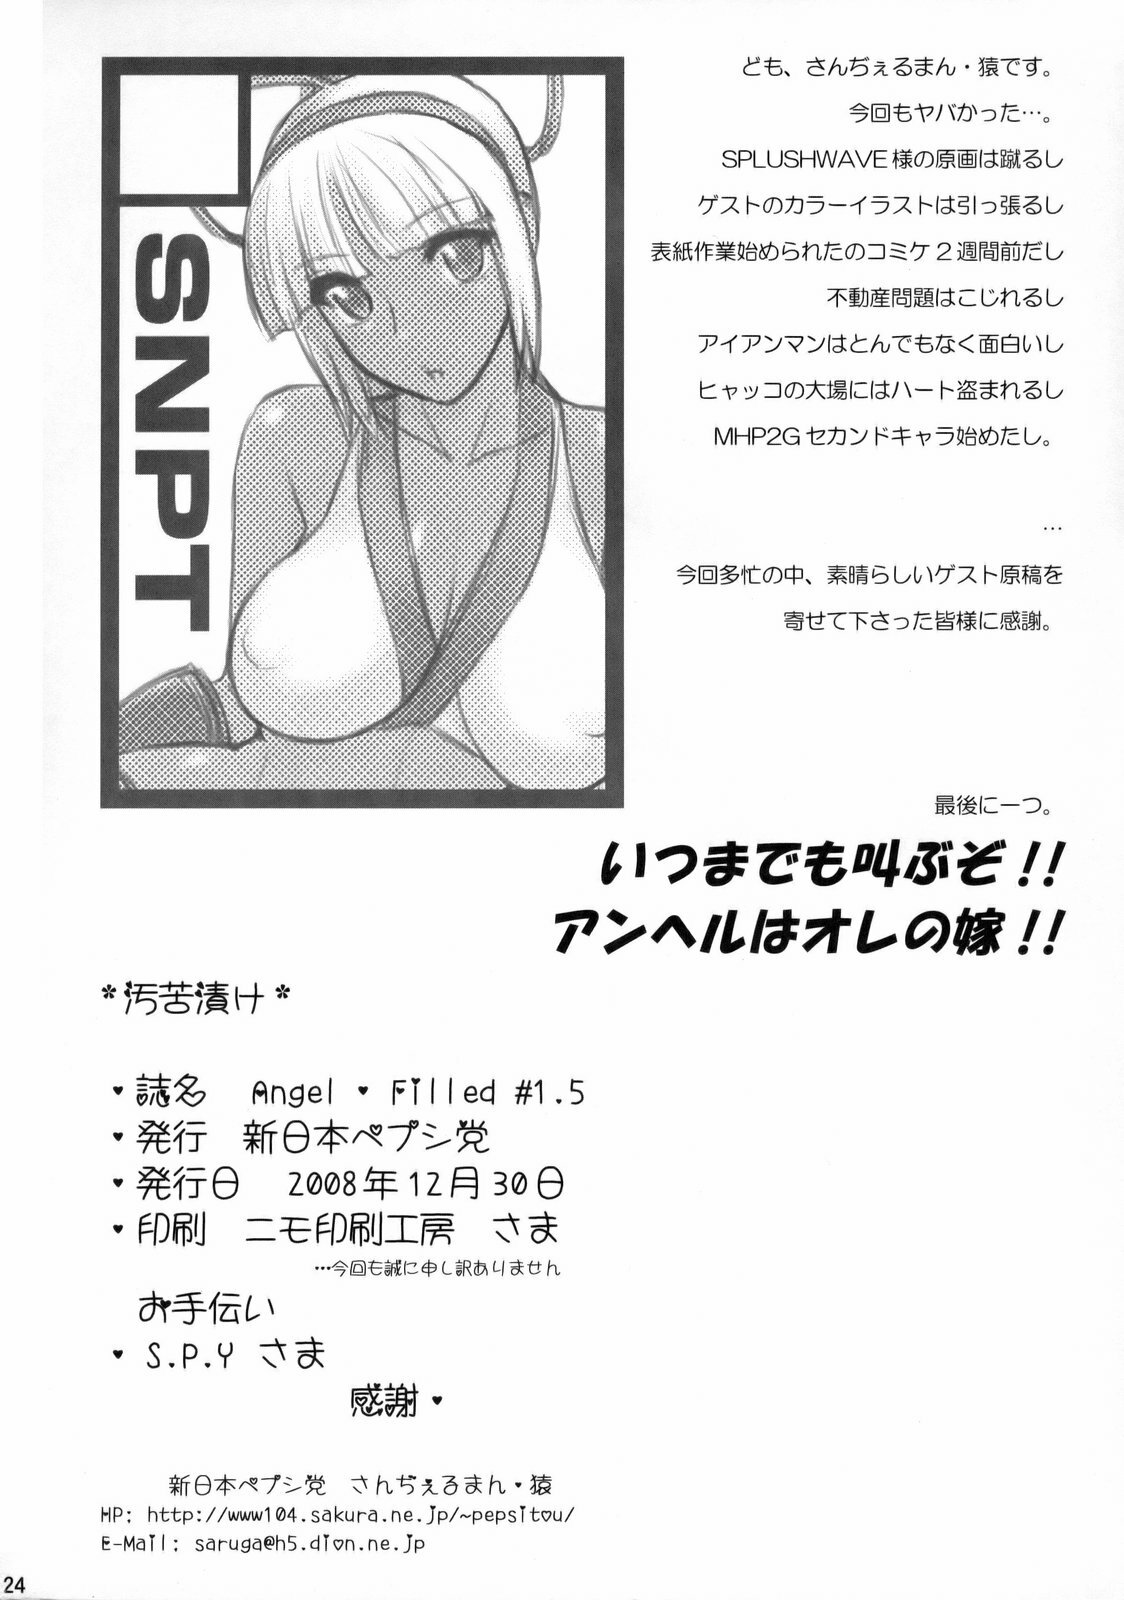 (C75) [Shinnihon Pepsitou (St.germain-sal)] Angel Filled #1.5 (King of Fighters) page 25 full